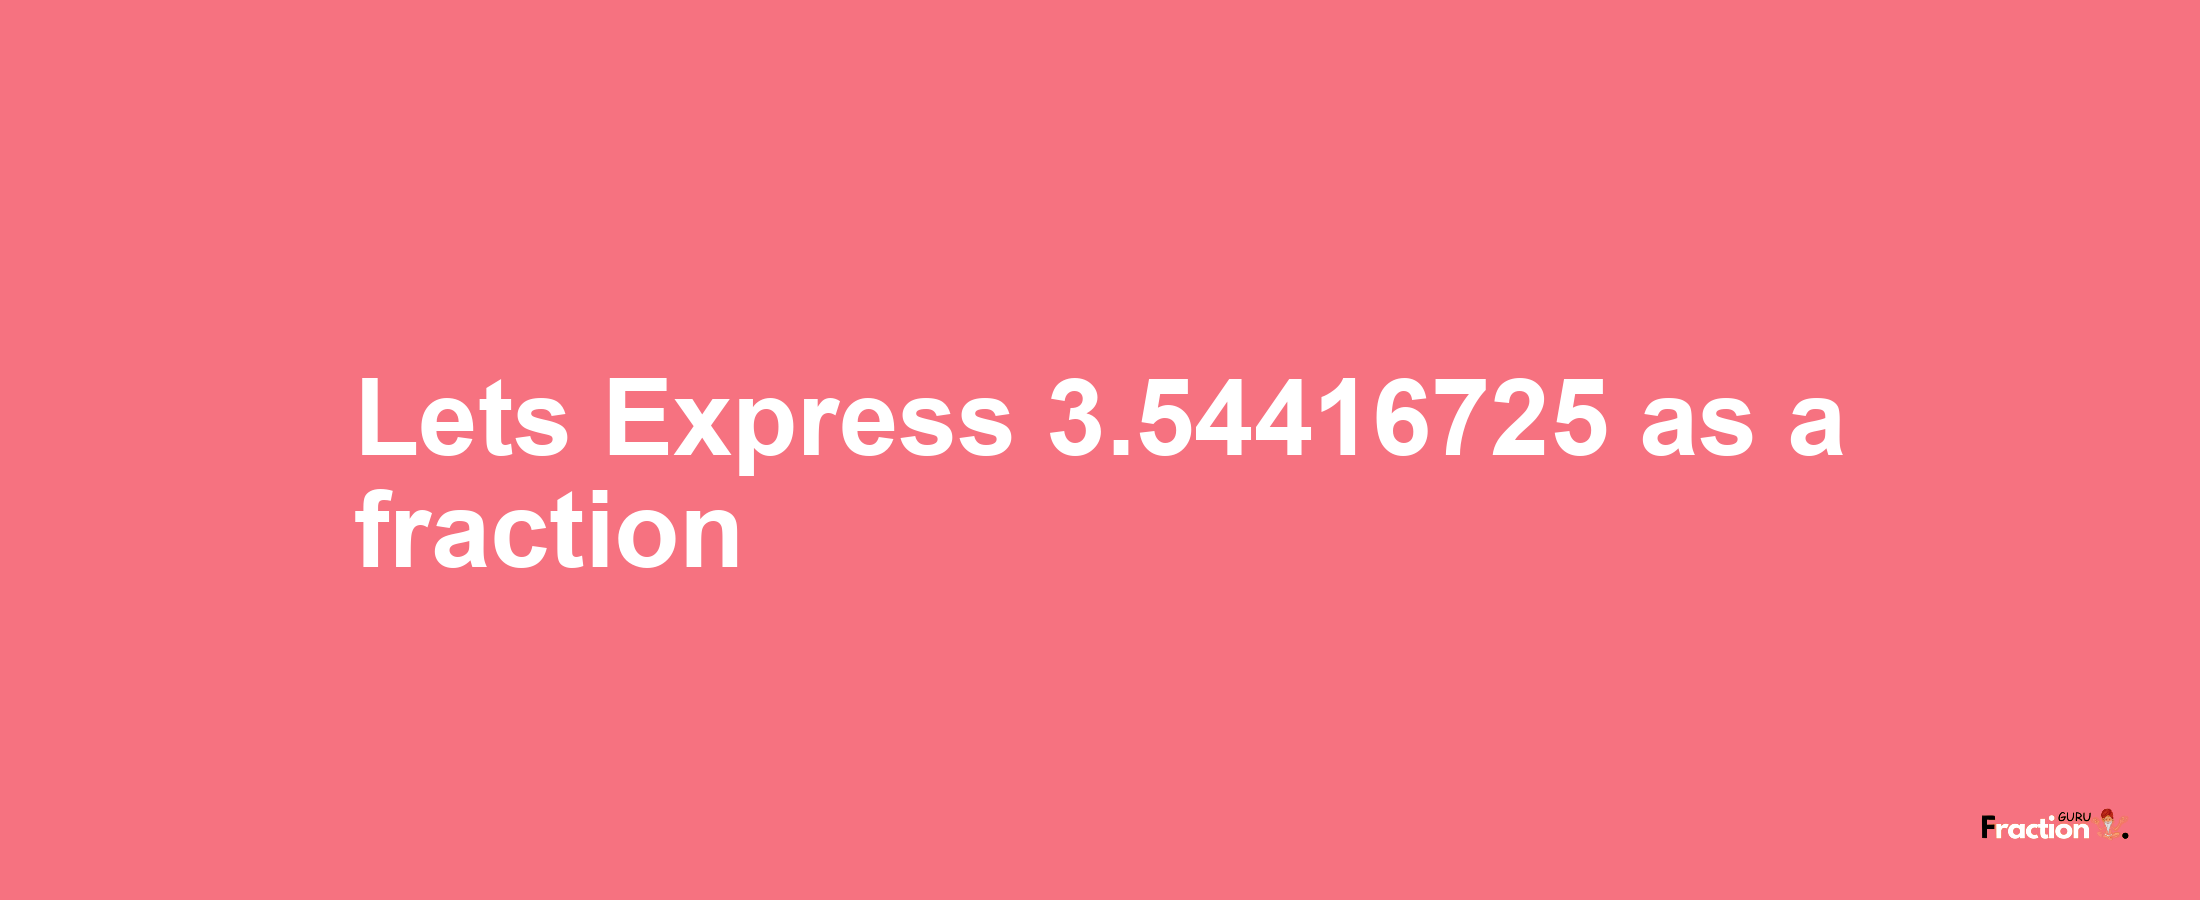 Lets Express 3.54416725 as afraction